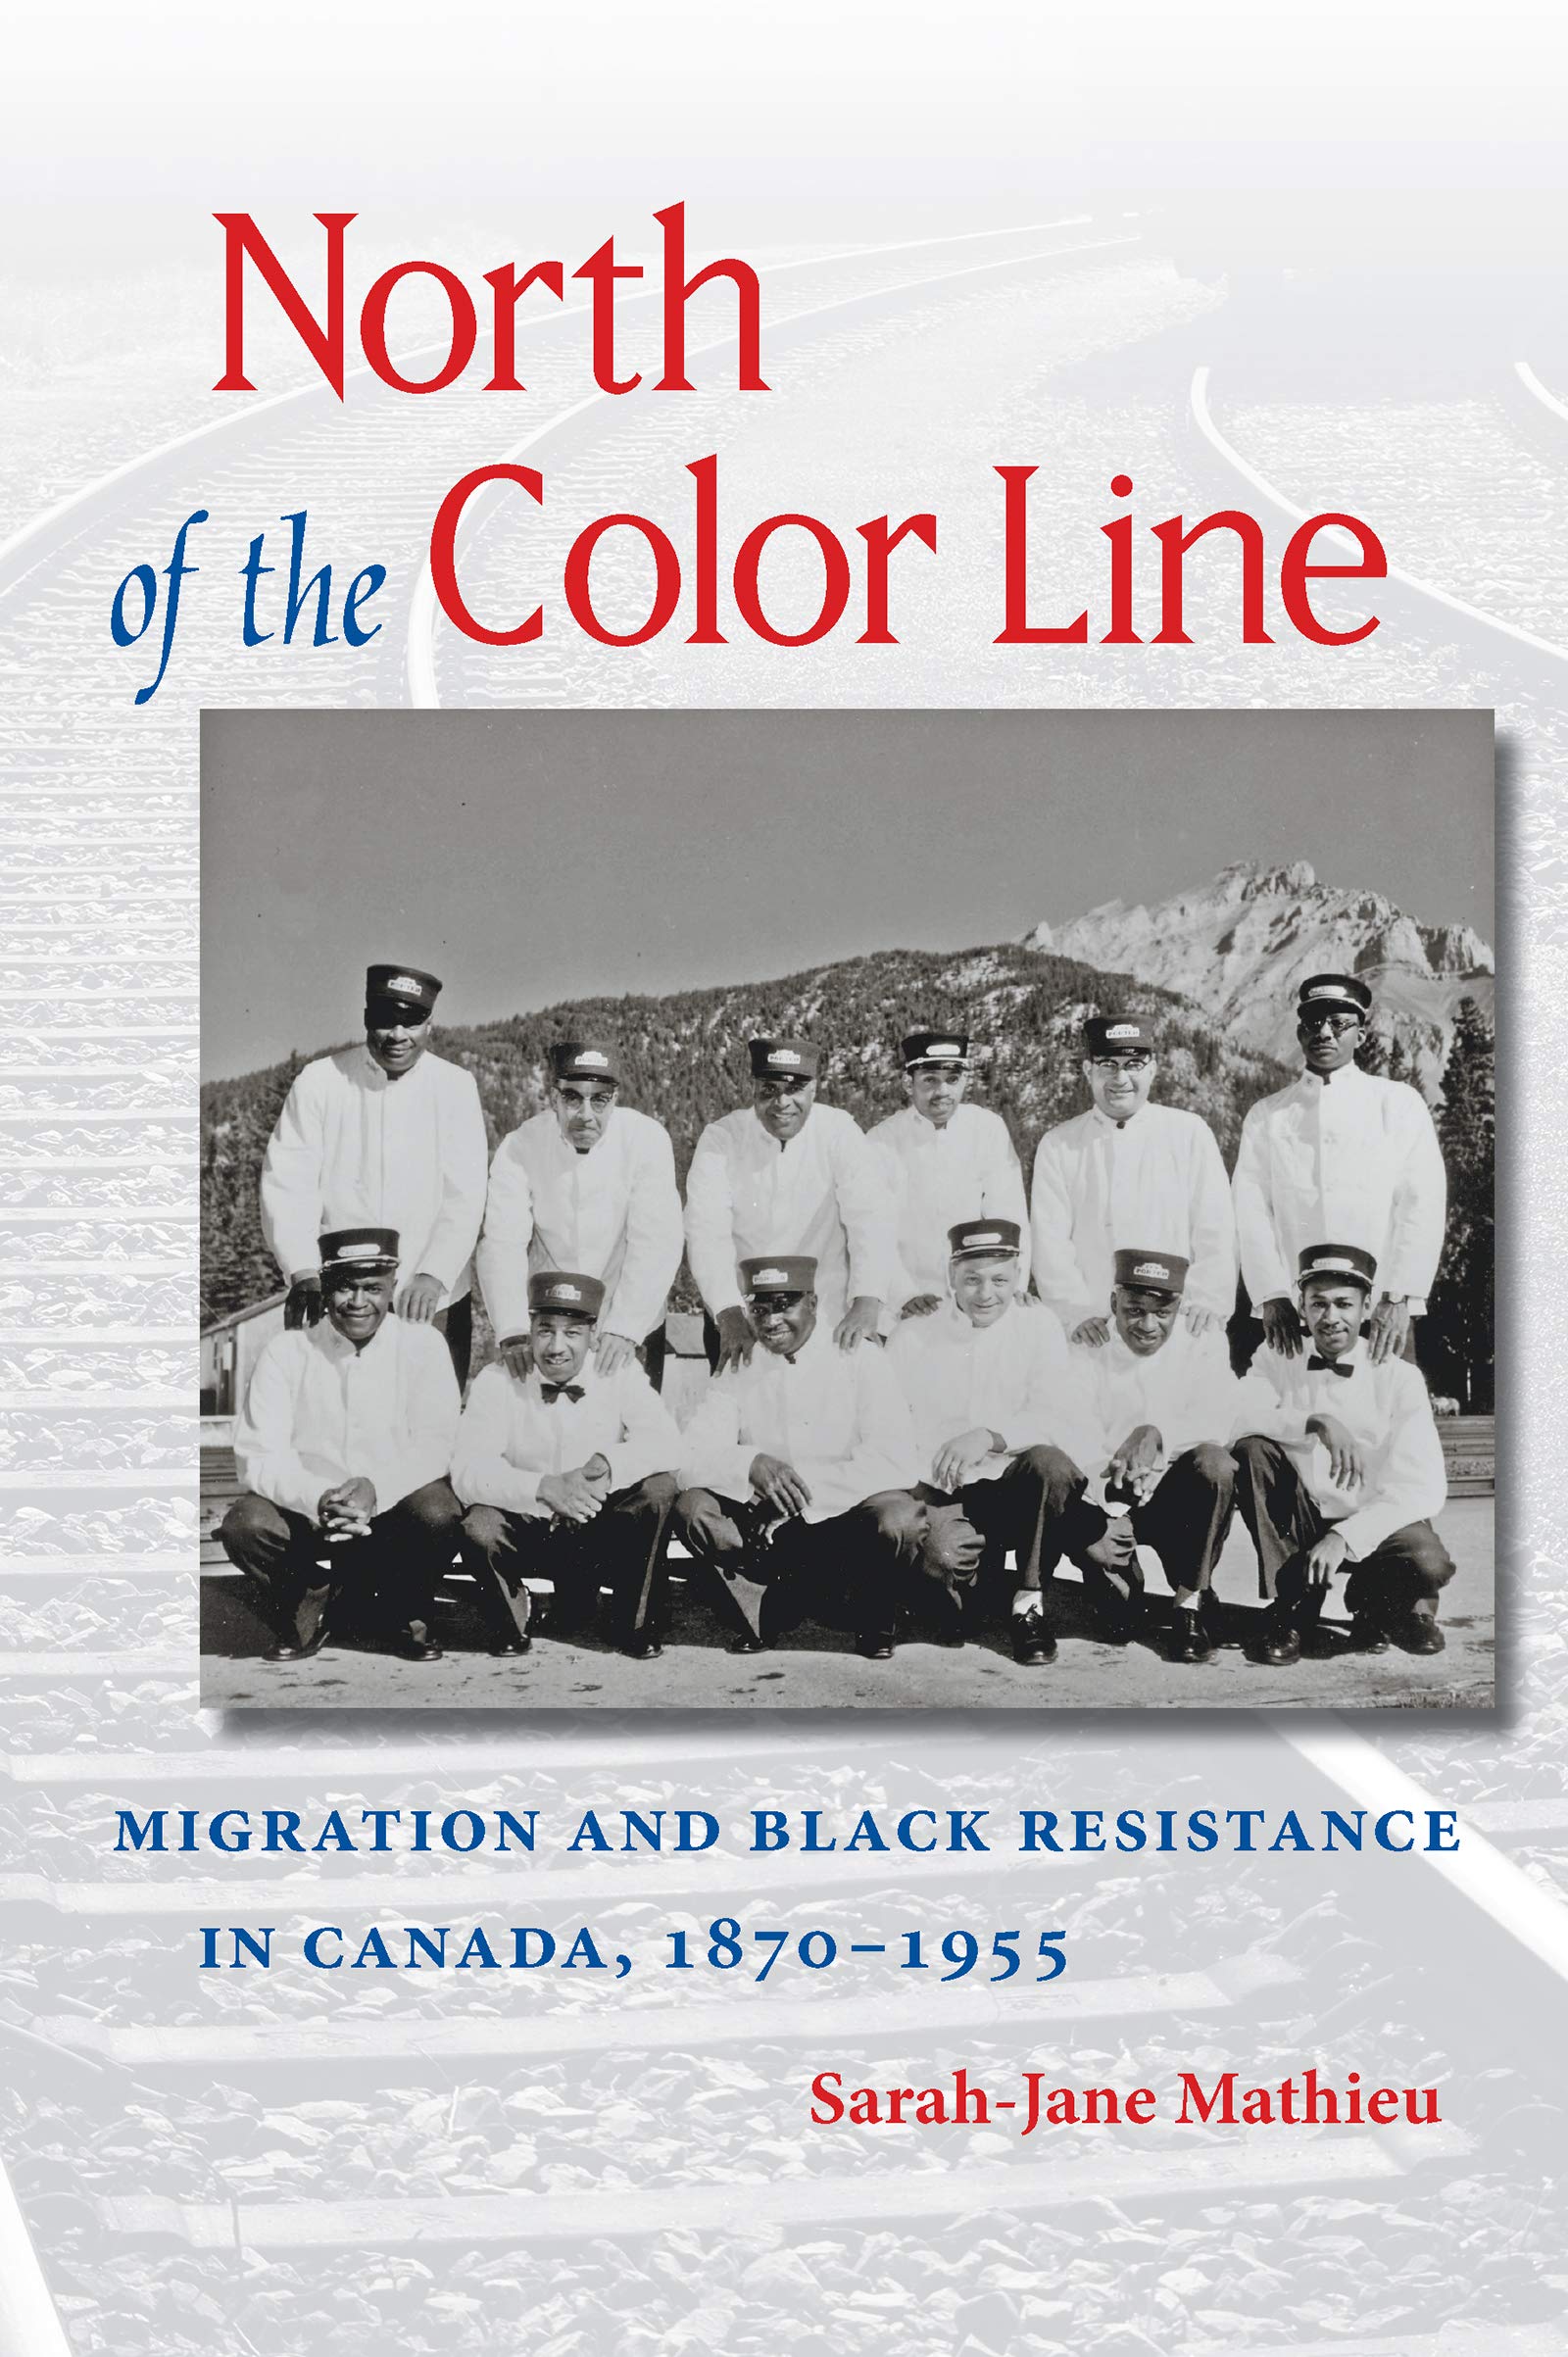 North of the Color Line: Migration and Black Resistance in Canada, 1870-1955 by Sarah-Jane Mathieu